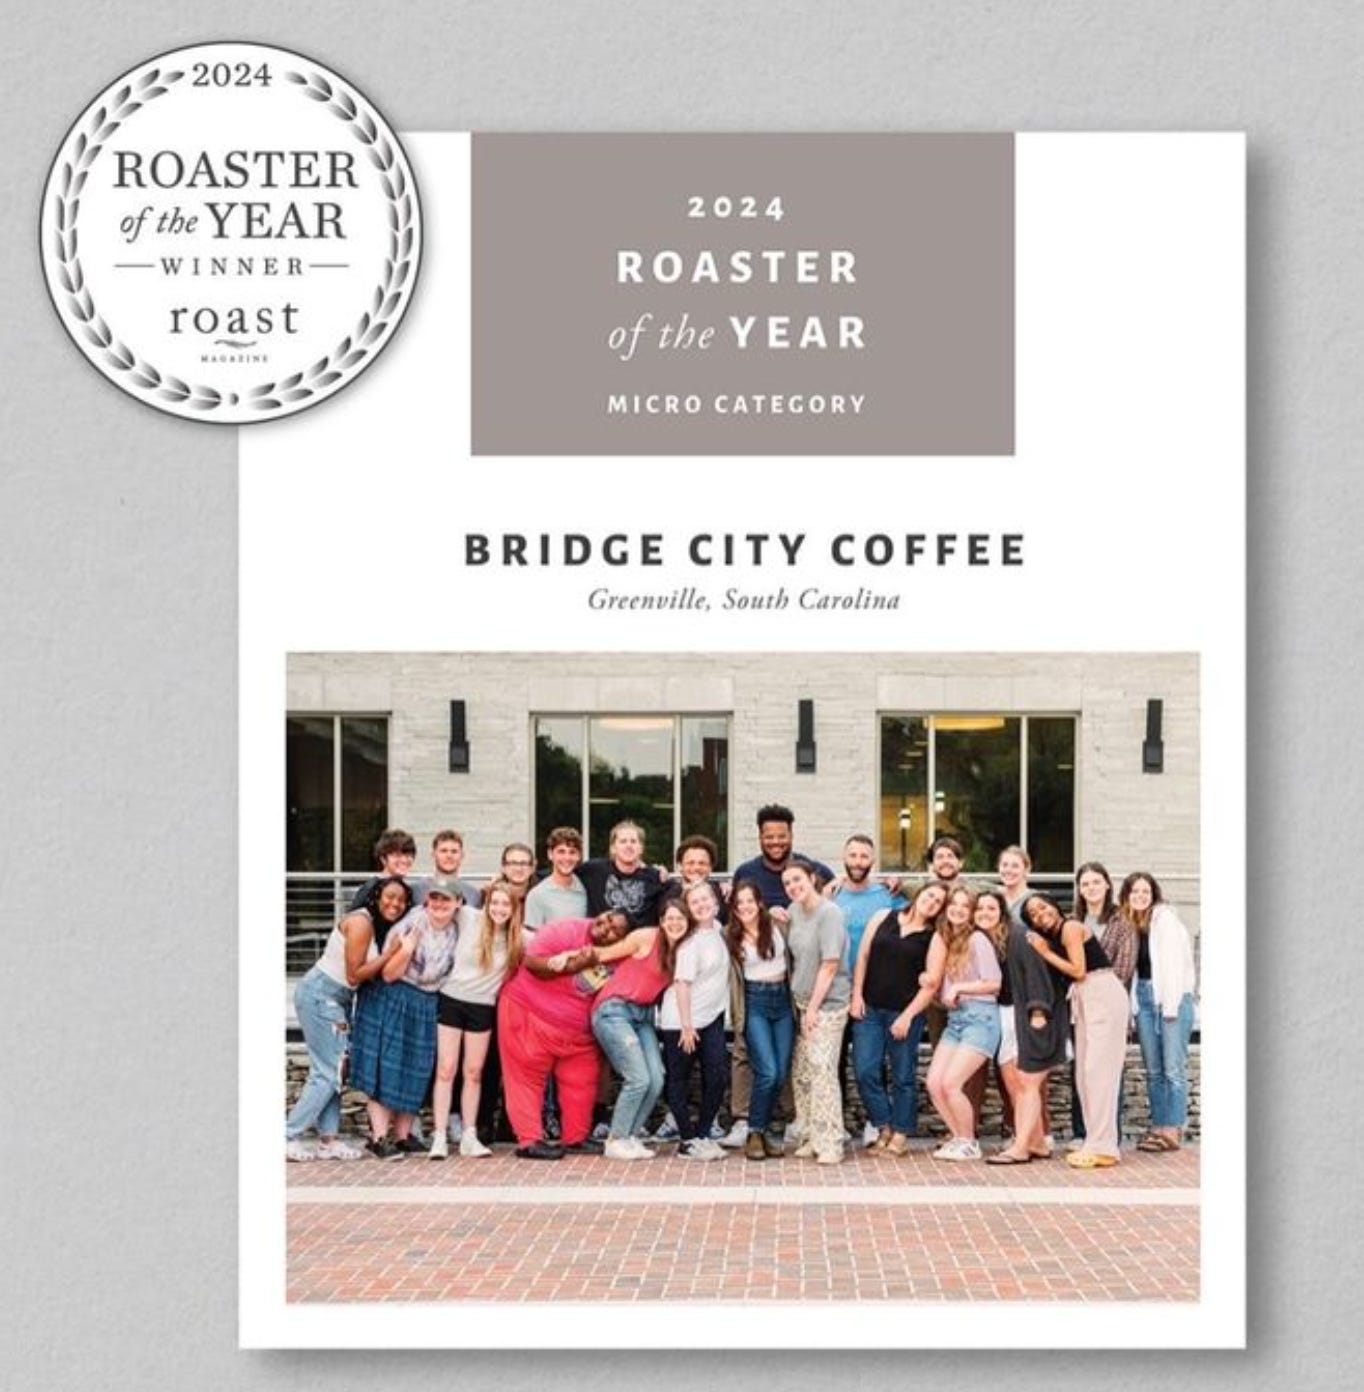 A banner proclaiming Bridge City Coffee the 2024 Roaster of the Year and a photograph of all the employees posing for the photo in front of a white concrete building. An estimated 35 people are smiling at the camera.